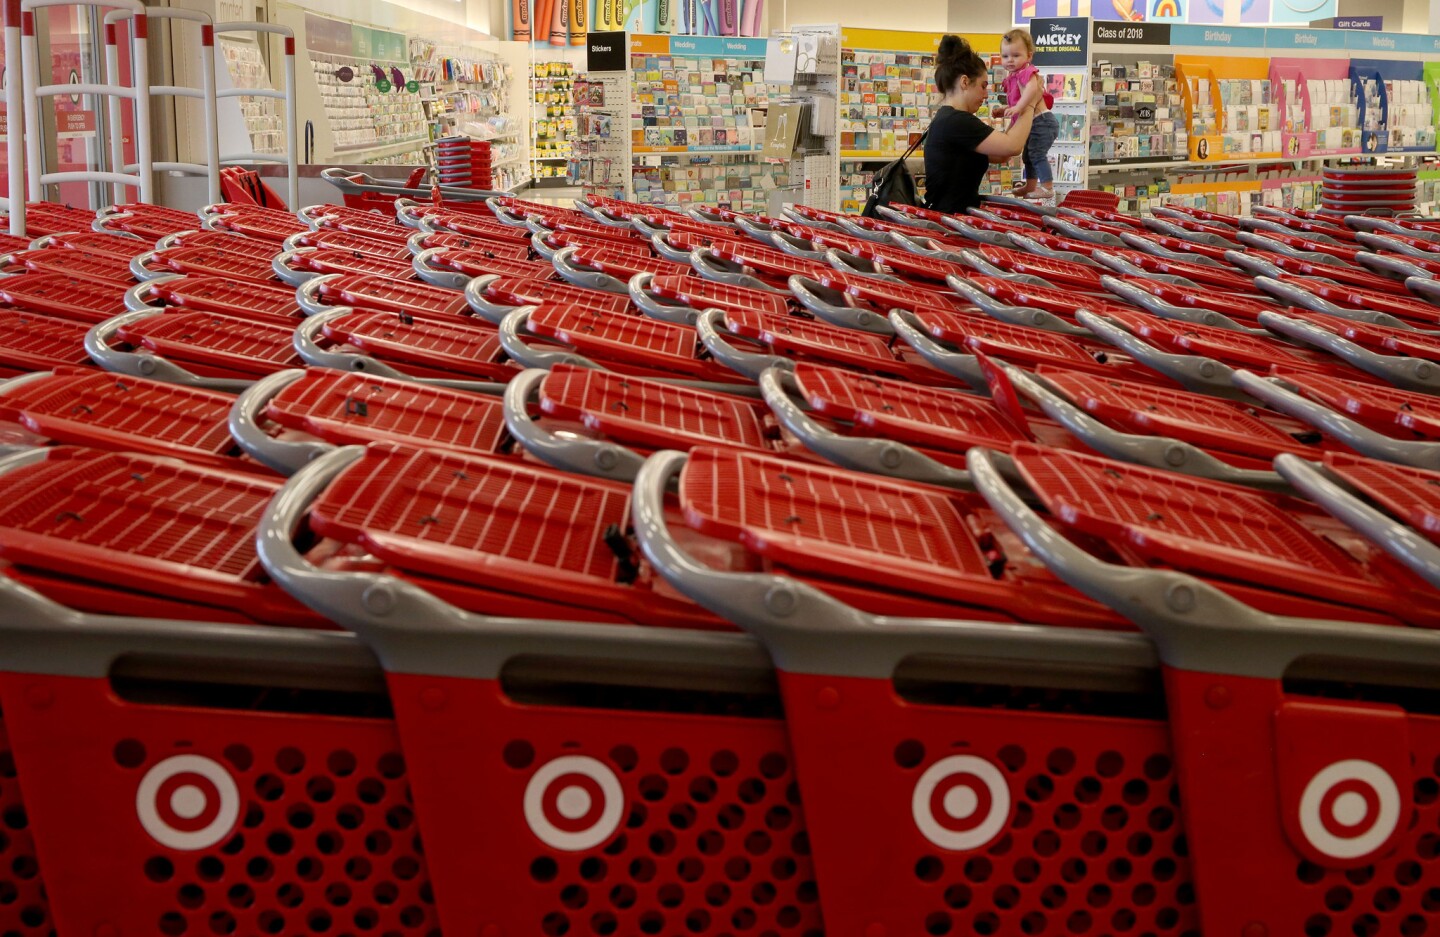 A woman places a child in a shopping cart at the remodeled Super Target store in Broadview on July 20, 2018.